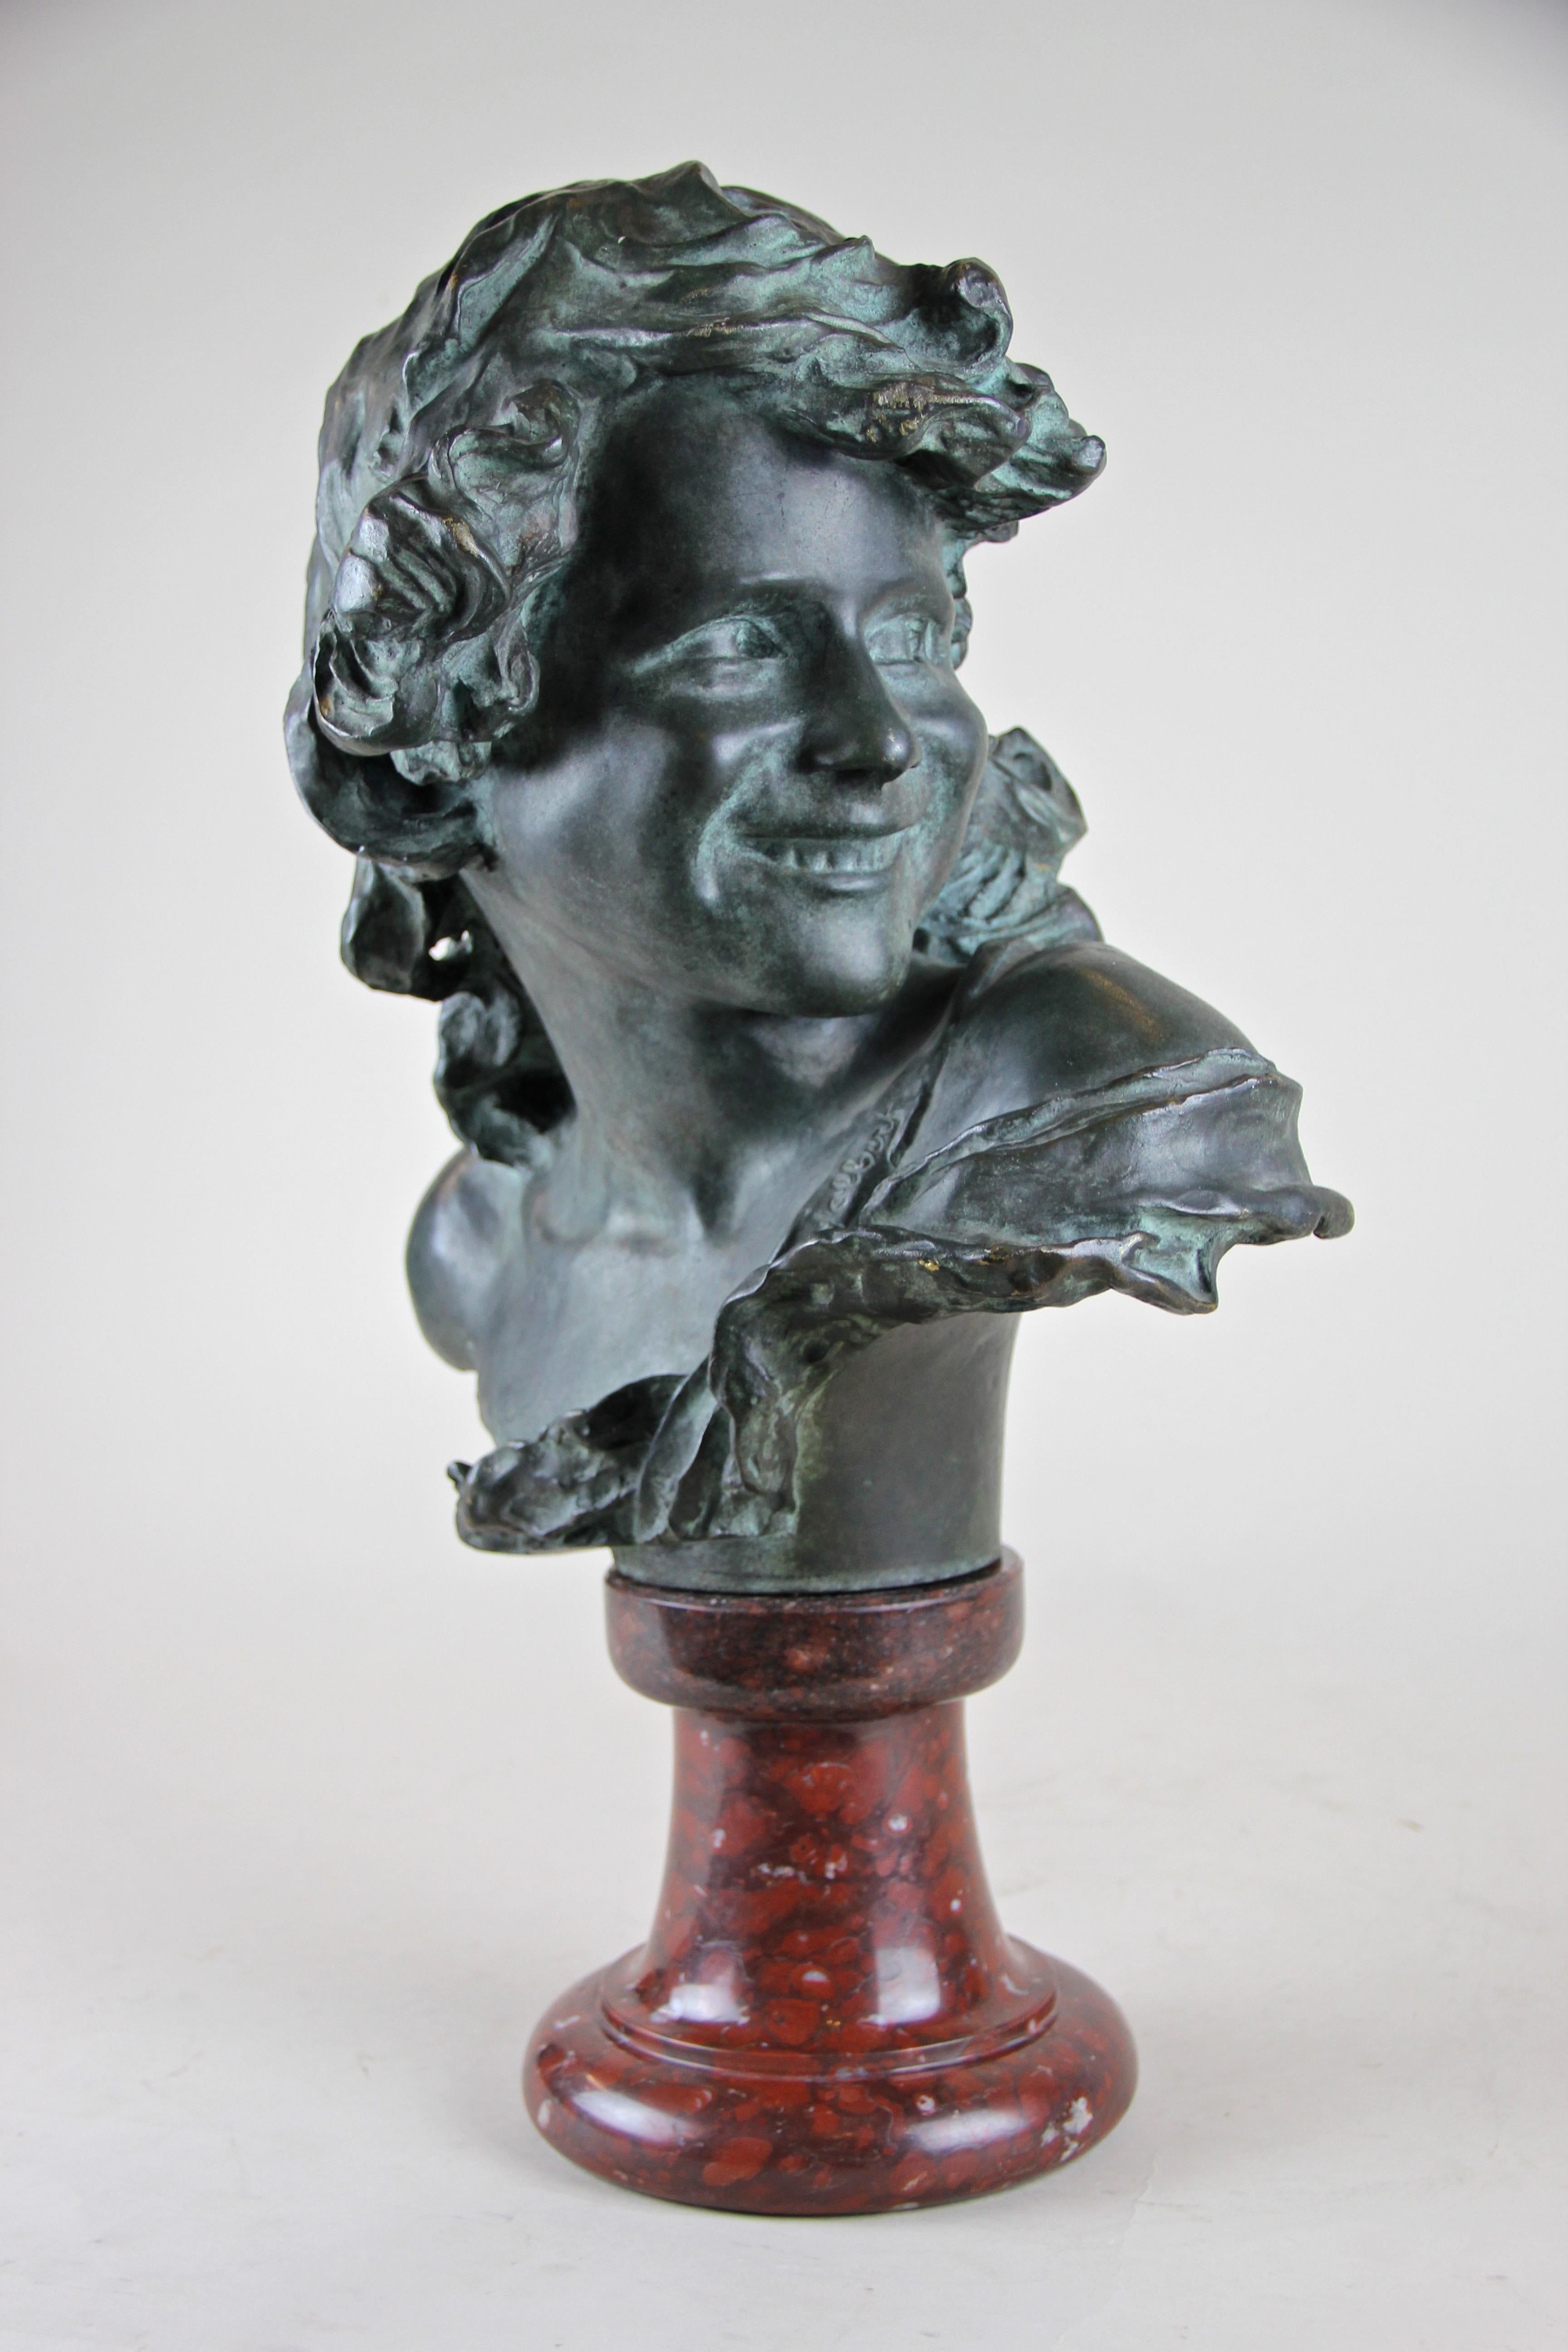 Excellent Art Nouveau bronze bust by famous french sculptor Jean Antoine Injalbert (1845-1933) from around 1900. This rare, extra large version - twice as big as the common available models, 19.9 inch! - of J. A. Injalberts 